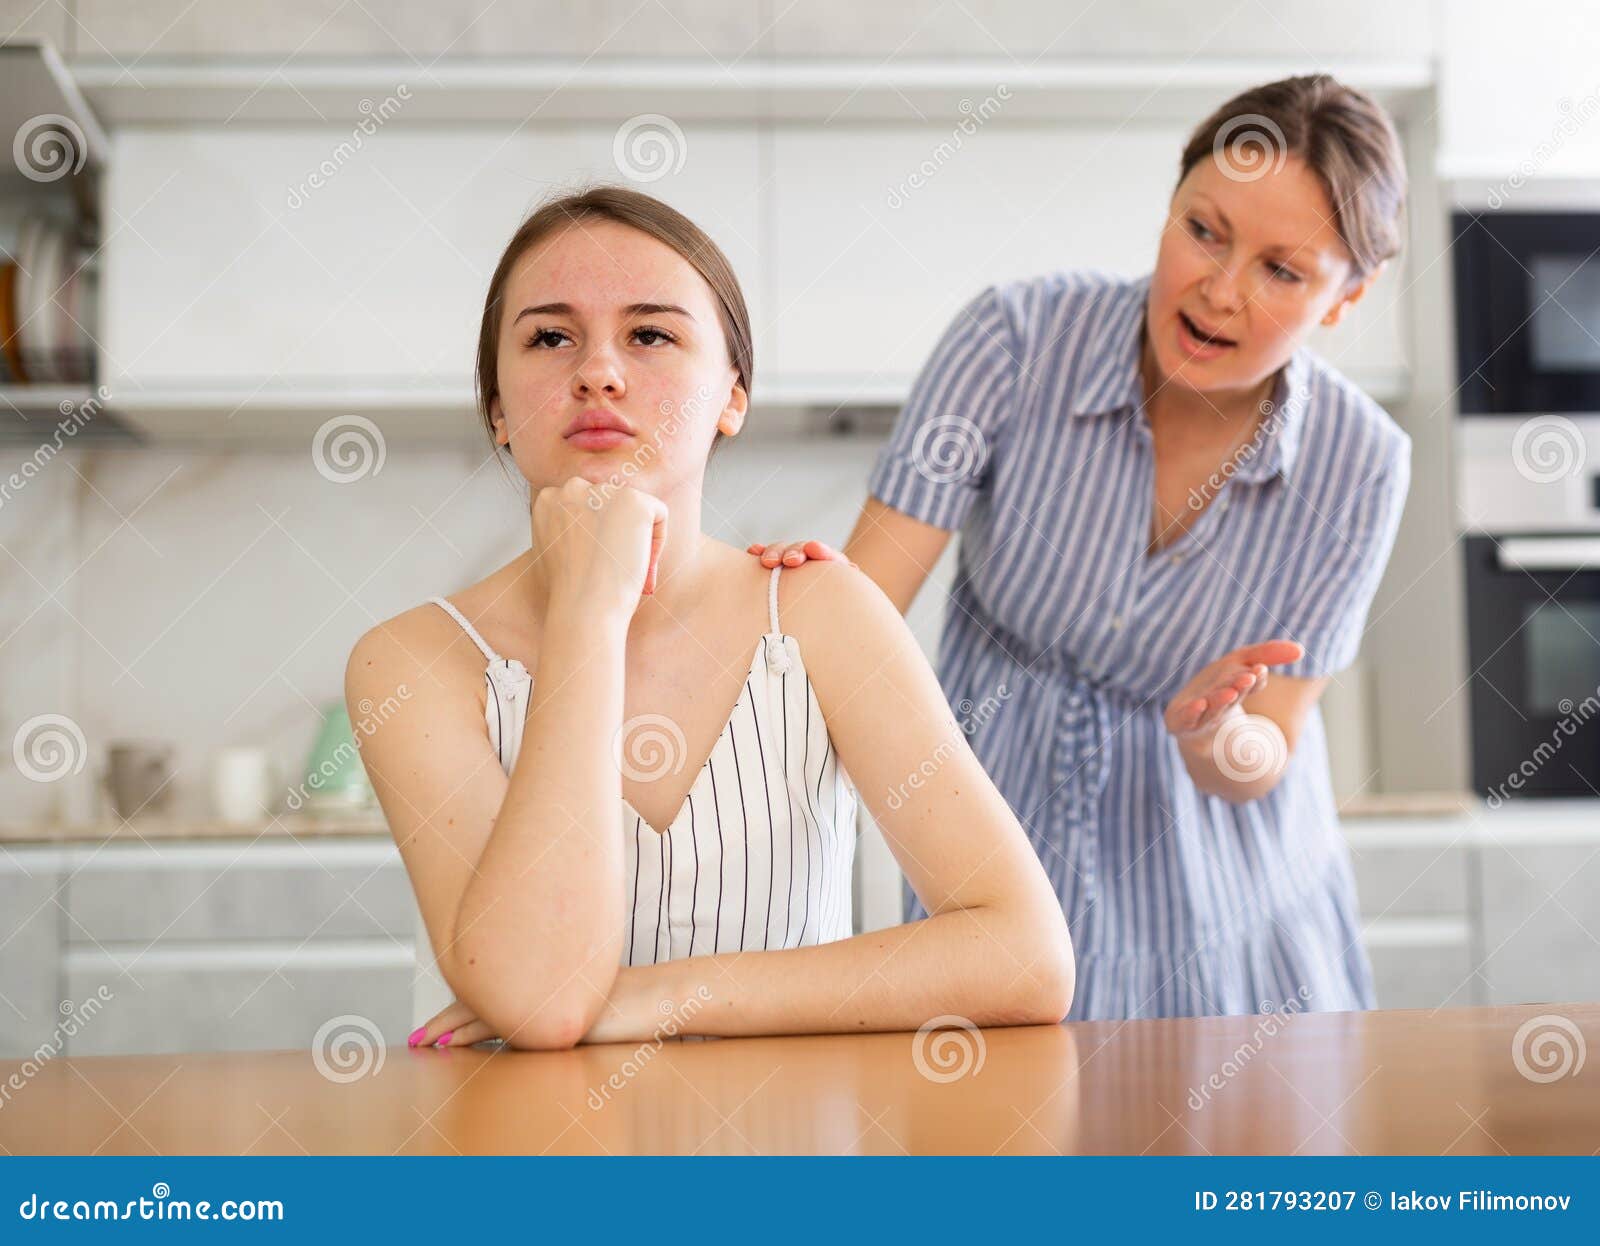 https://thumbs.dreamstime.com/z/resentful-teen-girl-sitting-table-her-mother-speaking-to-her-standing-behind-kitchen-offended-young-girl-sitting-281793207.jpg